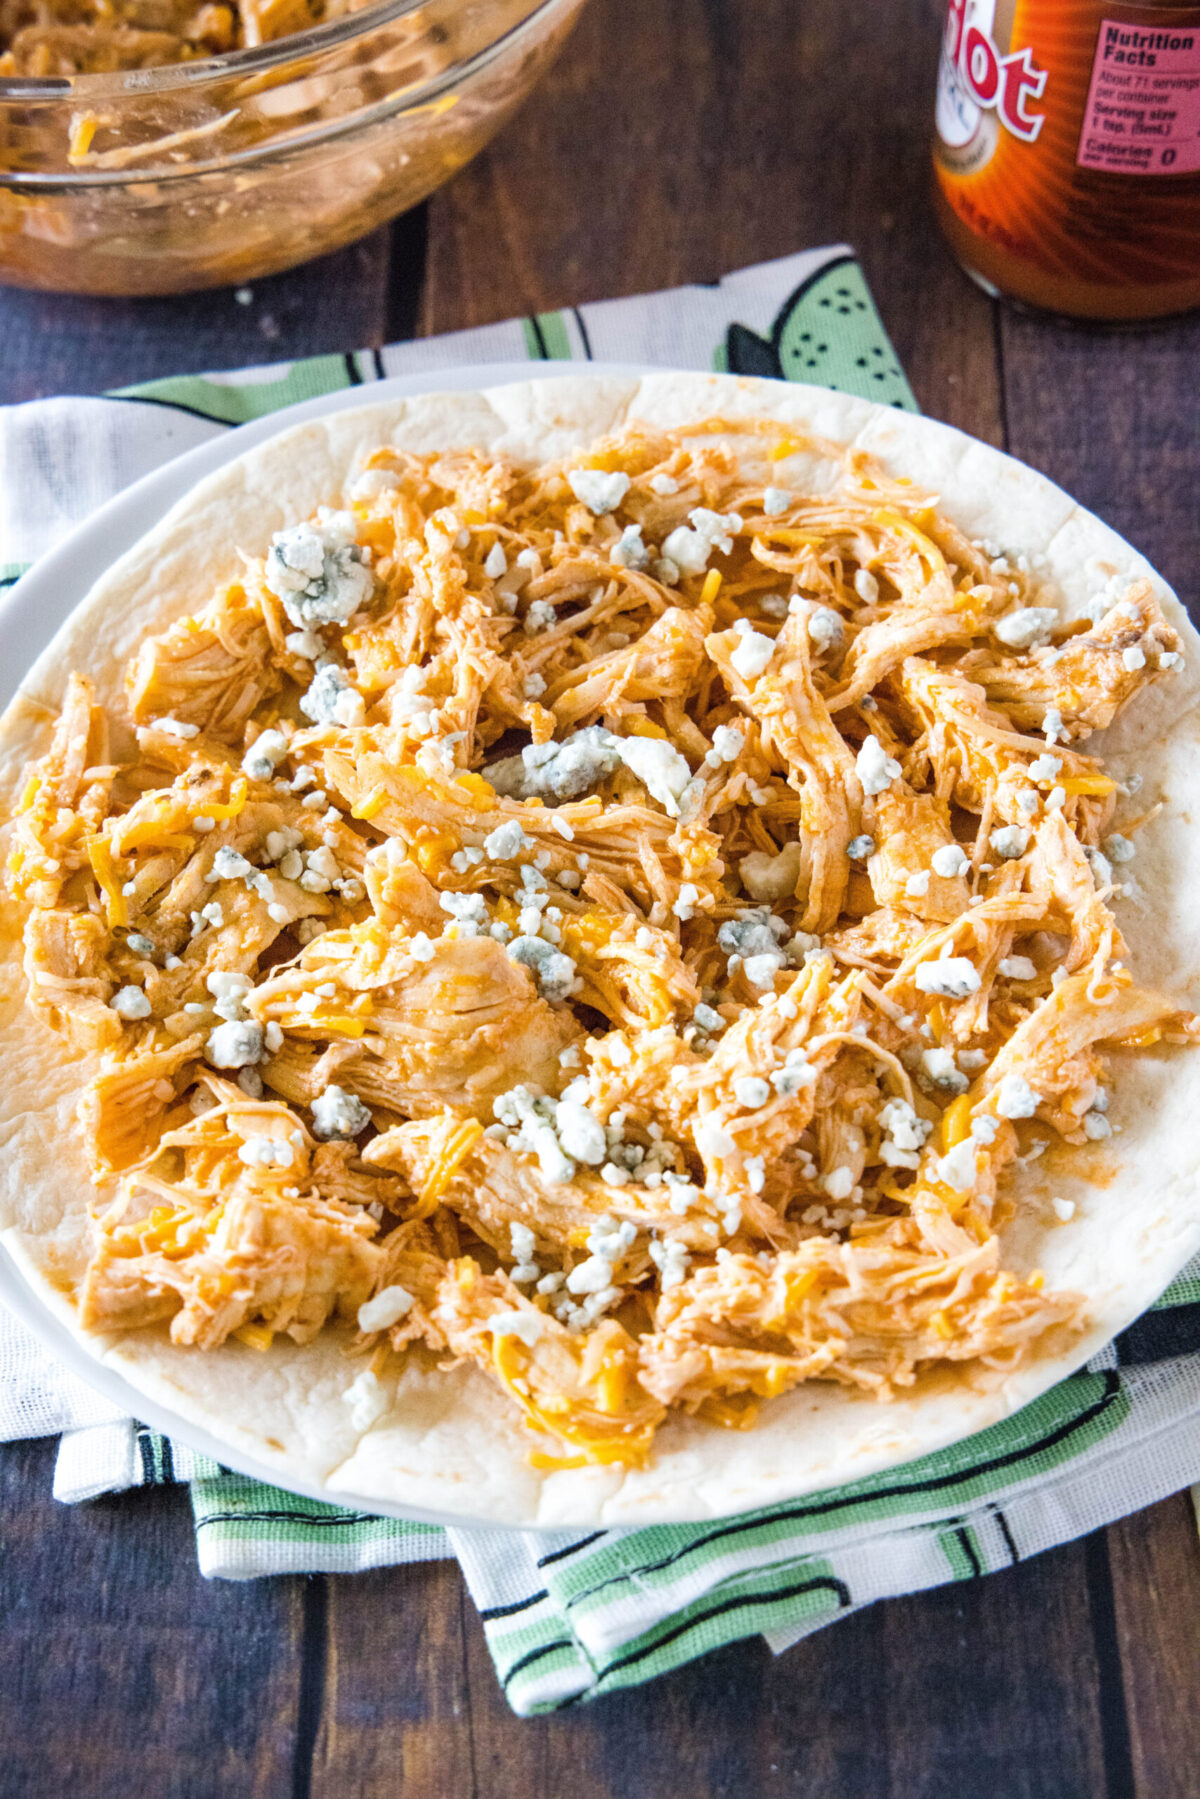 A plate with a tortilla topped with buffalo chicken and cheese mixture, topped with blue cheese crumbles